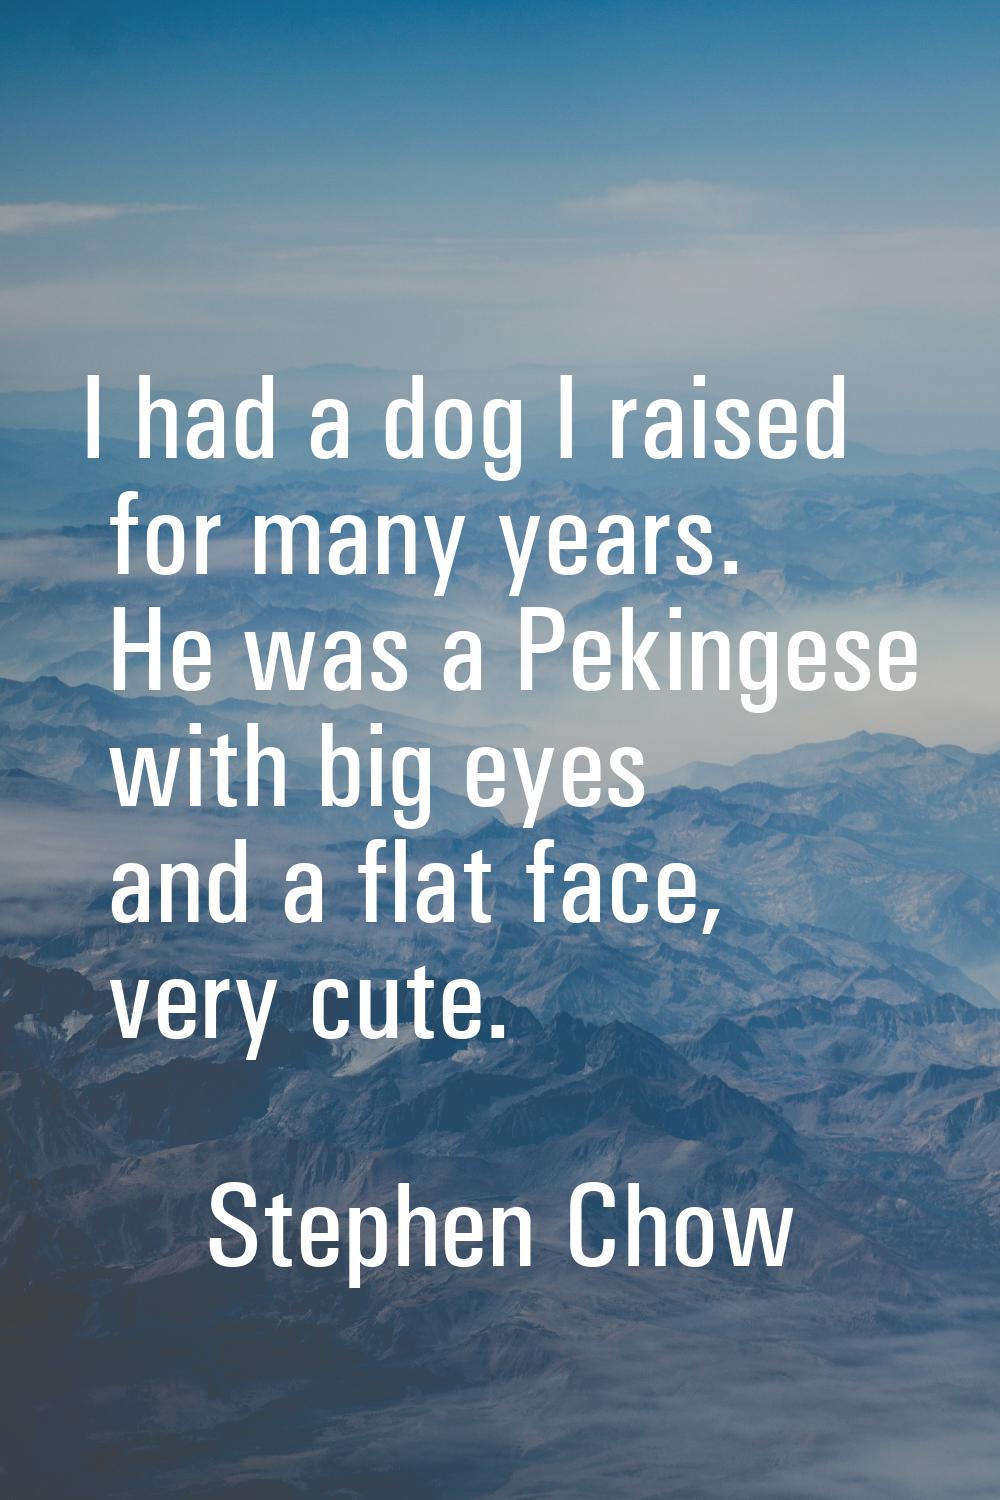 I had a dog I raised for many years. He was a Pekingese with big eyes and a flat face, very cute.